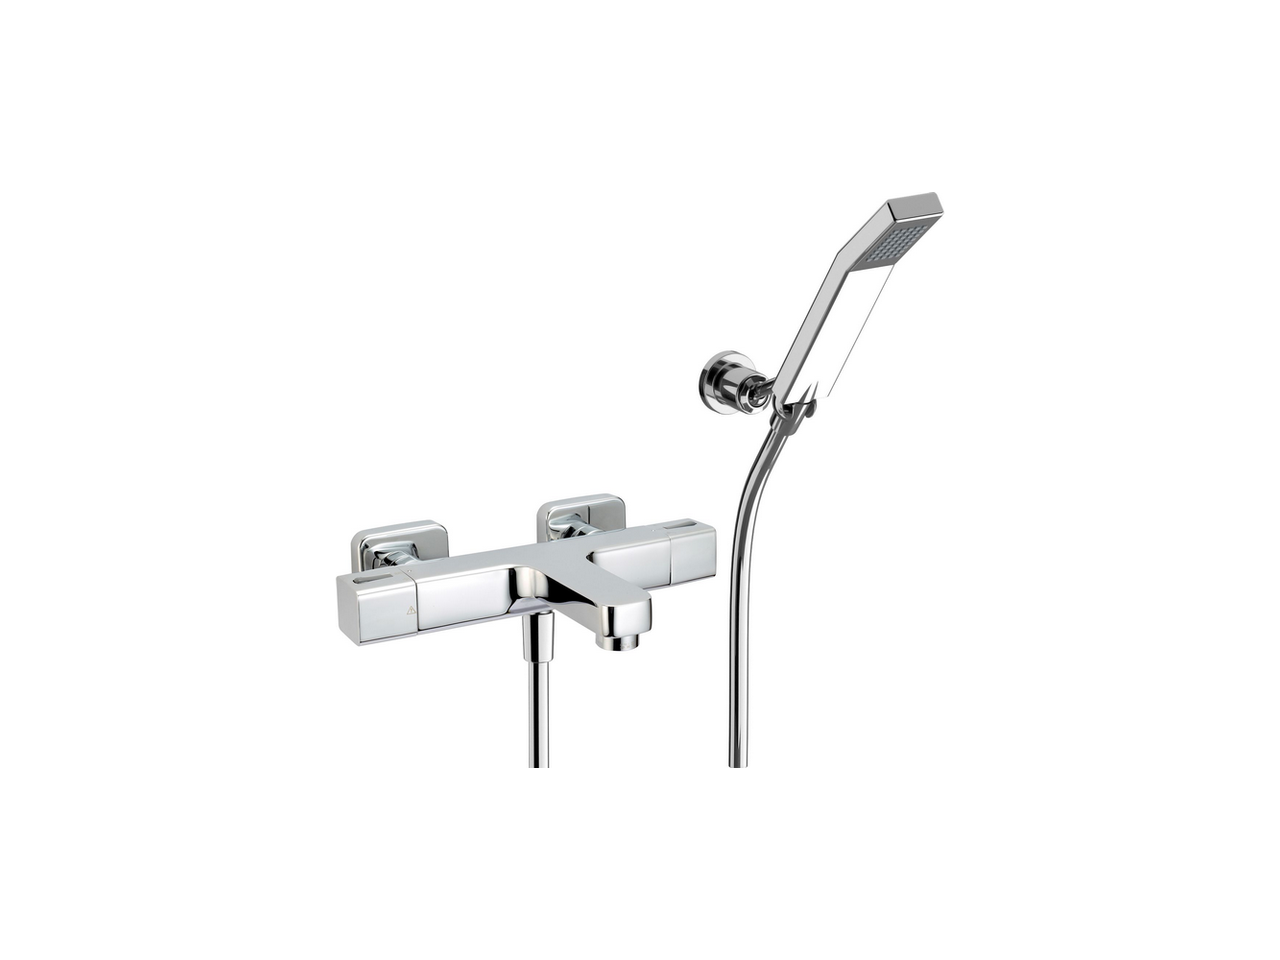 CisalThermostatic bath mixer, with shower set CUBIC_CUD21020